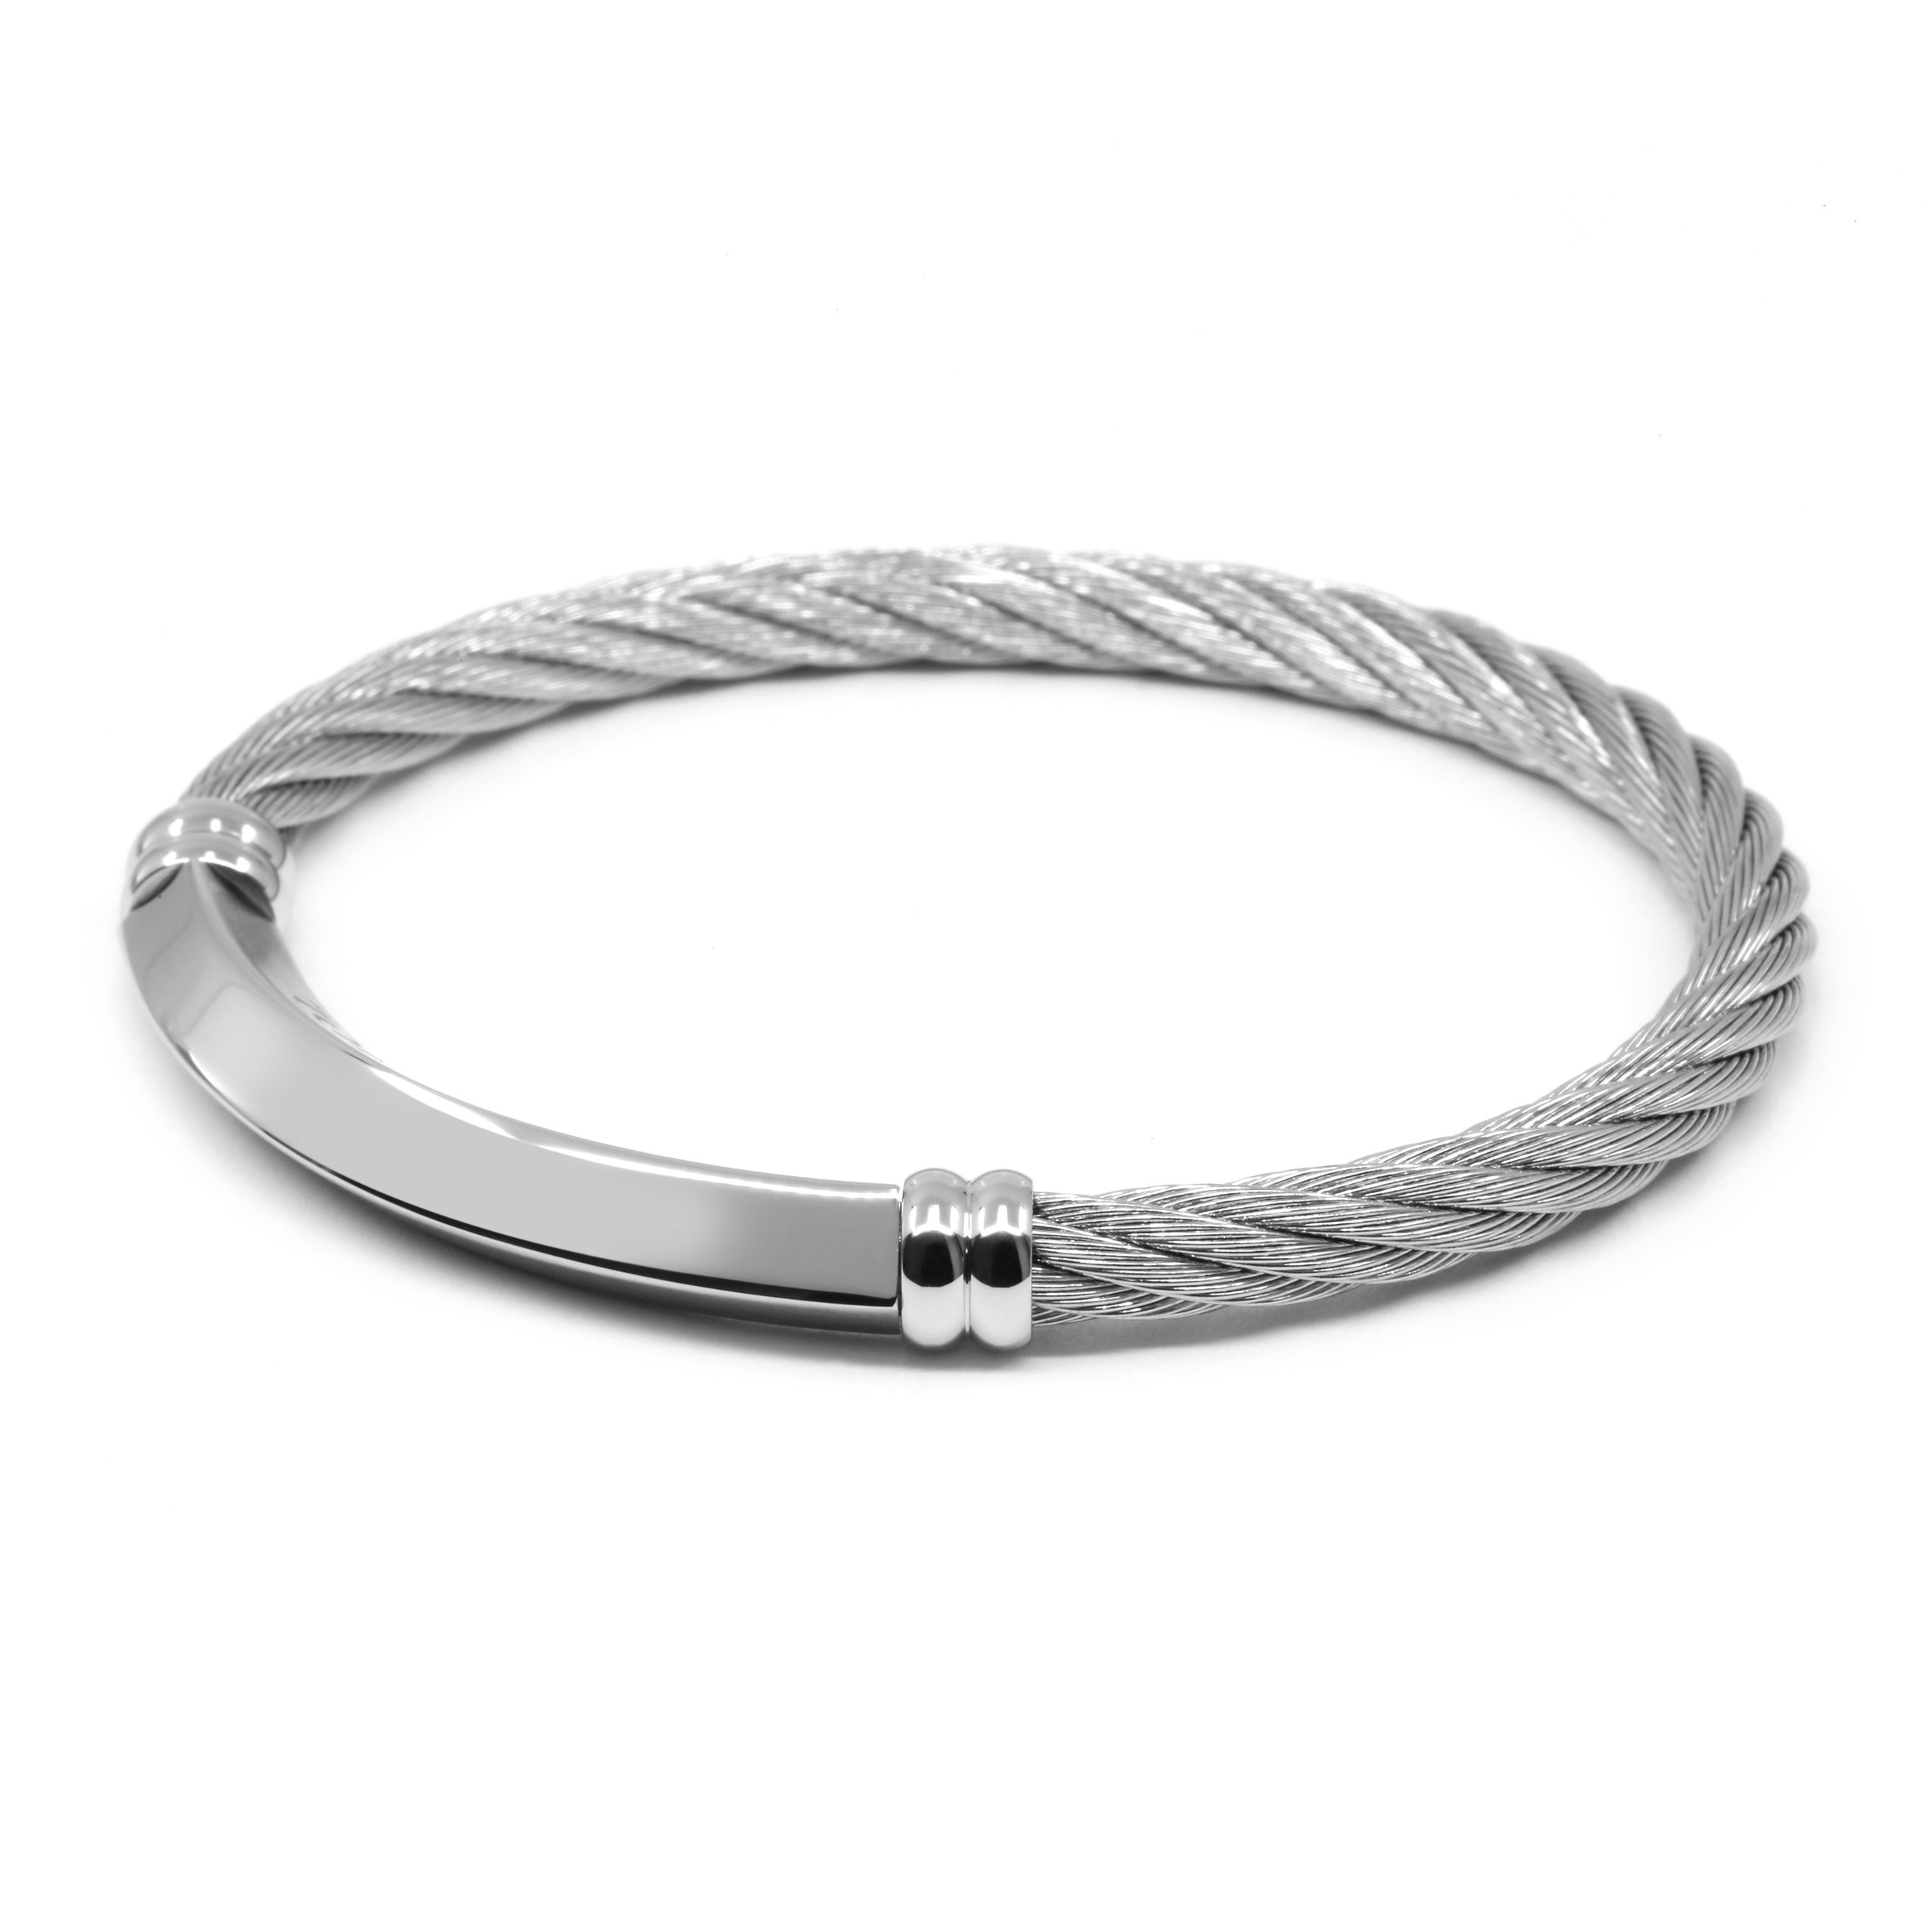 Better Half Bangle - Stainless Steel Decor, Stainless Steel Cable.jpg